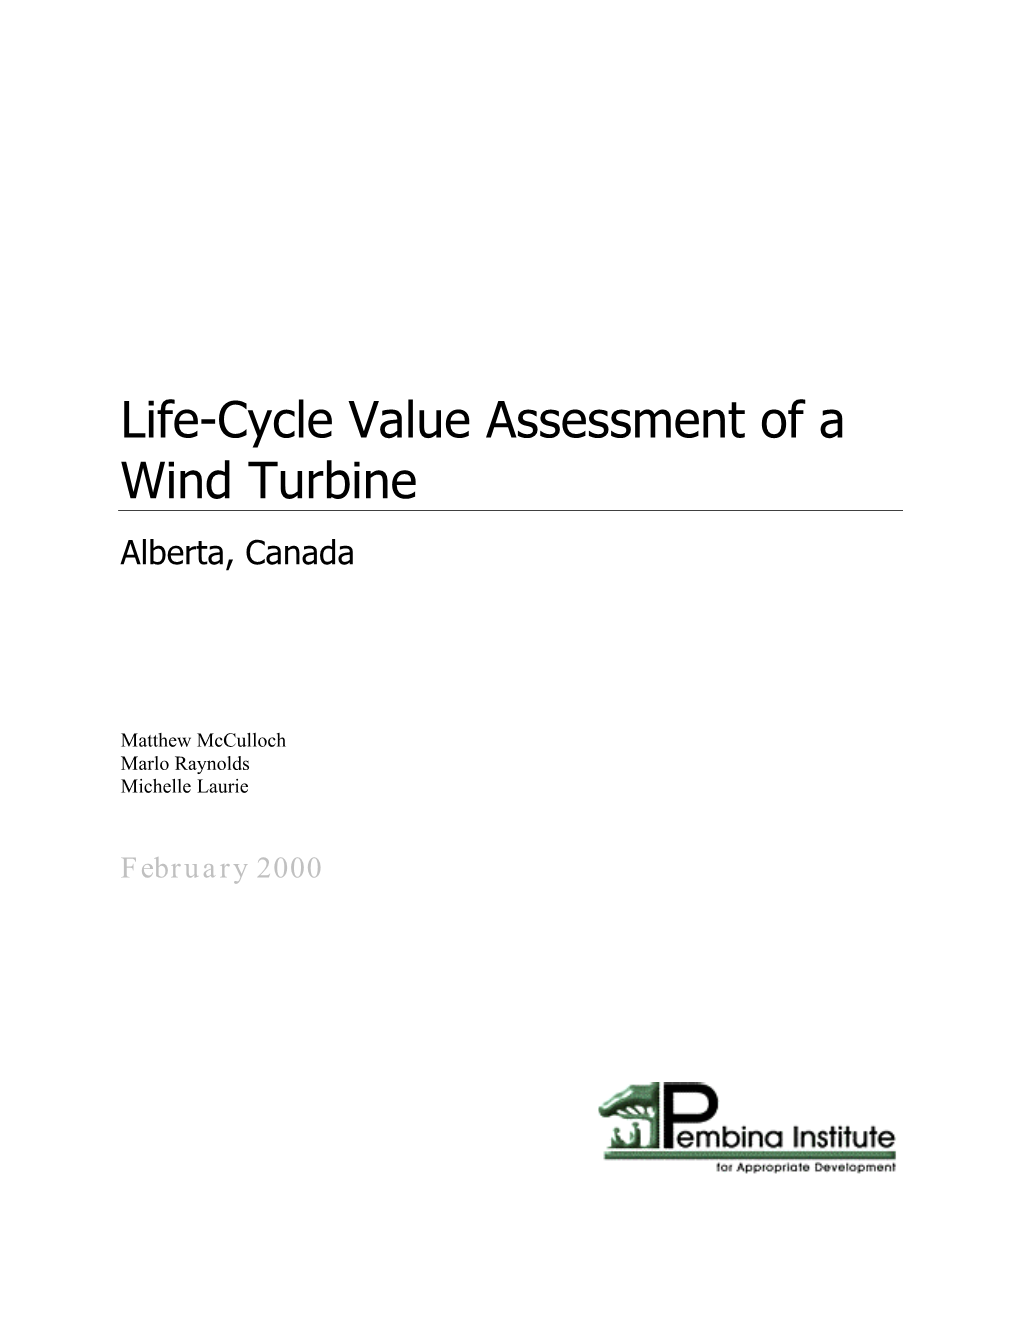 Life-Cycle Value Assessment of a Wind Turbine Alberta, Canada